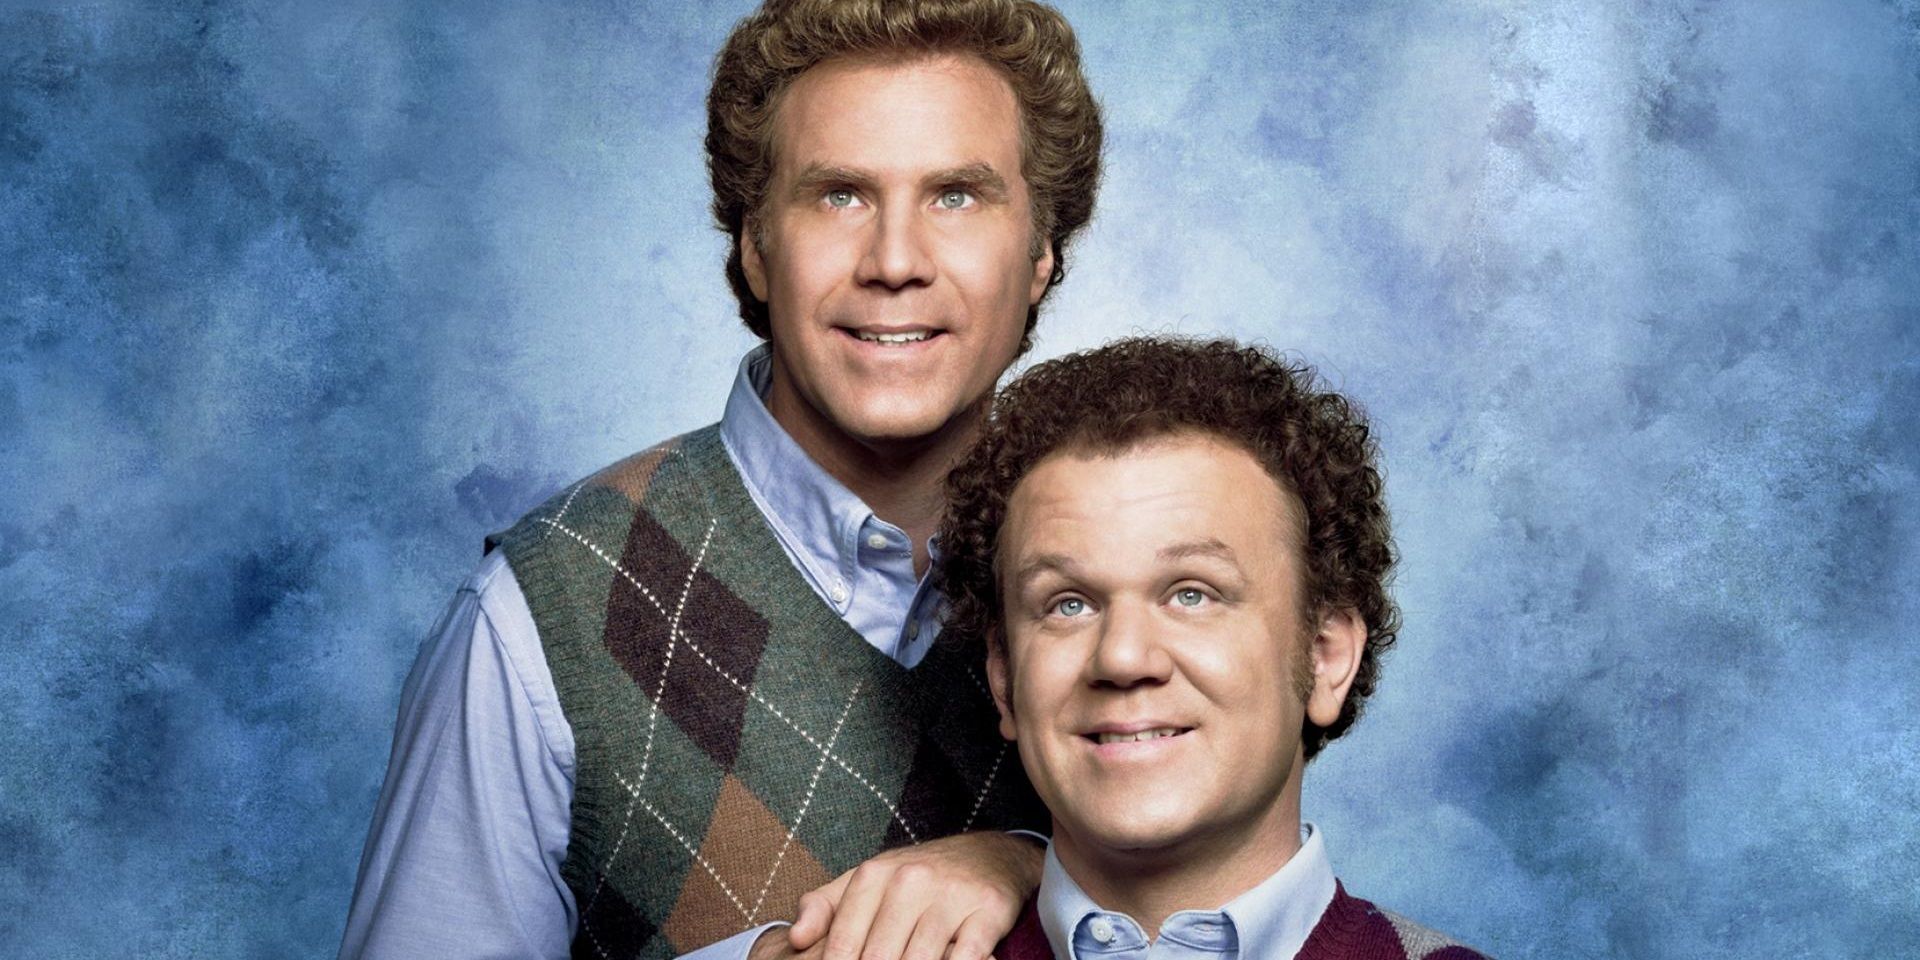 Will Ferrell and John C. Reily pose on the poster for Step Brothers